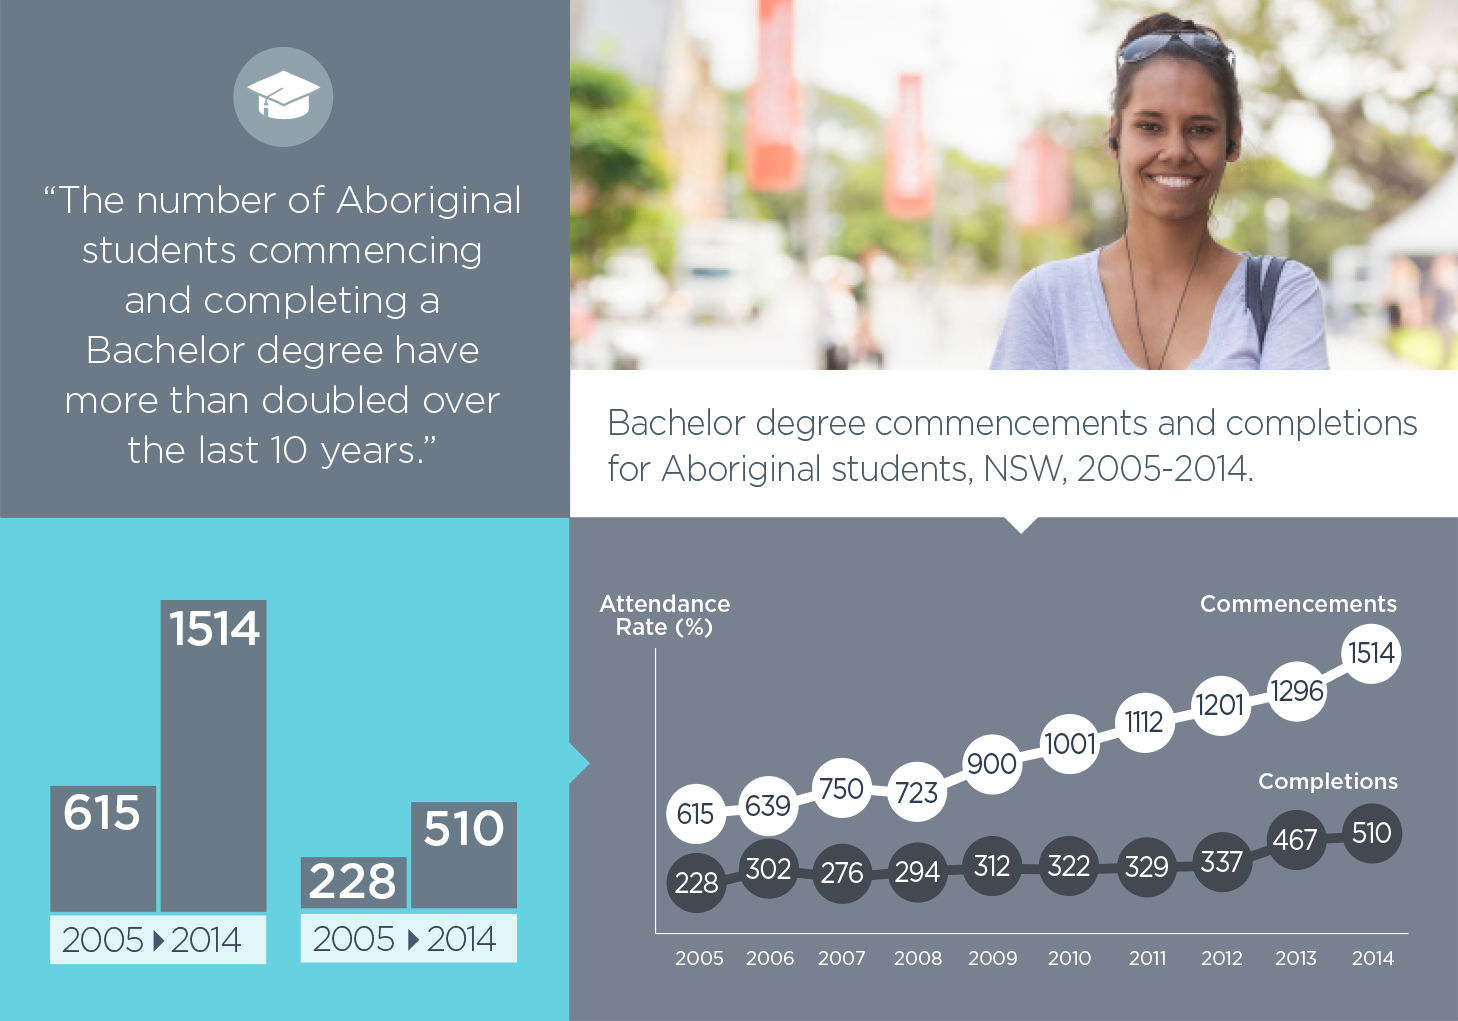 The number of Aboriginal students commencing and completing a Bachelor degree have more than doubled over the last ten years.